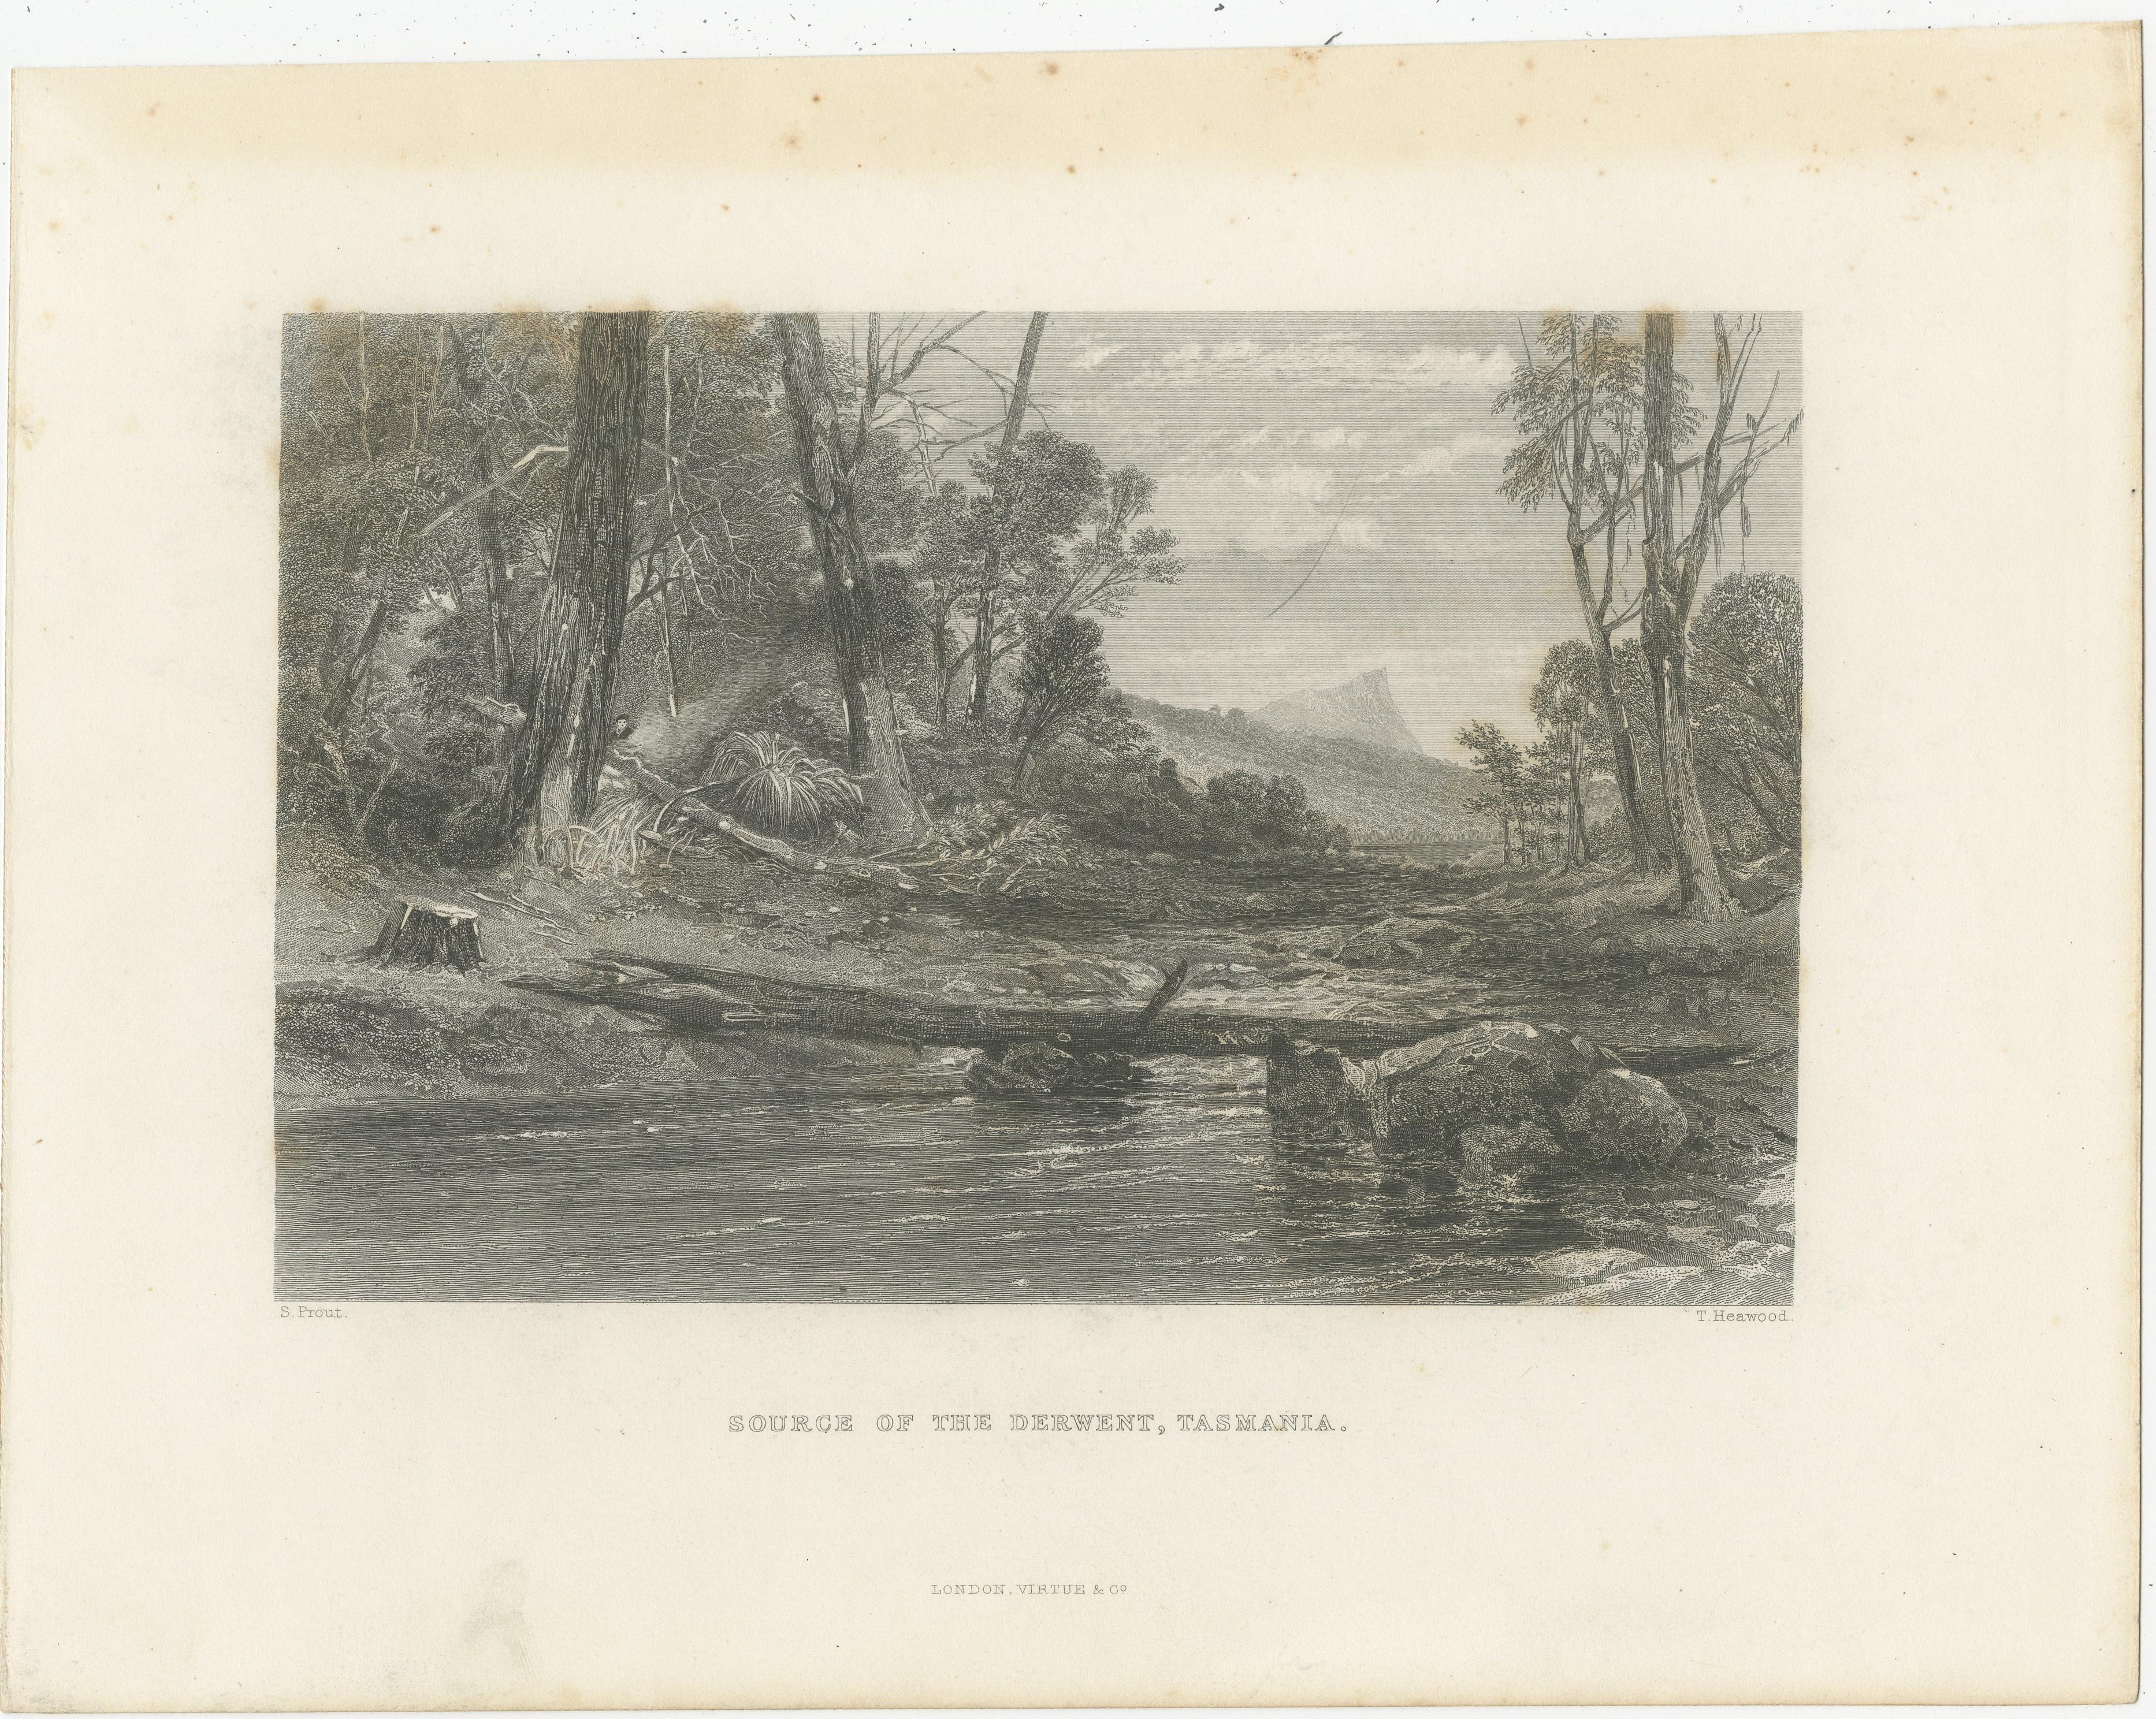 Antique print titled 'Source of the Derwent, Tasmania'. View of River Derwent, Tasmania, Australia. The River Derwent has its source in Lake St Clair, the nation's deepest lake. Engraved by T. Heawood after S. Prout. Published by Virtue & Co, circa